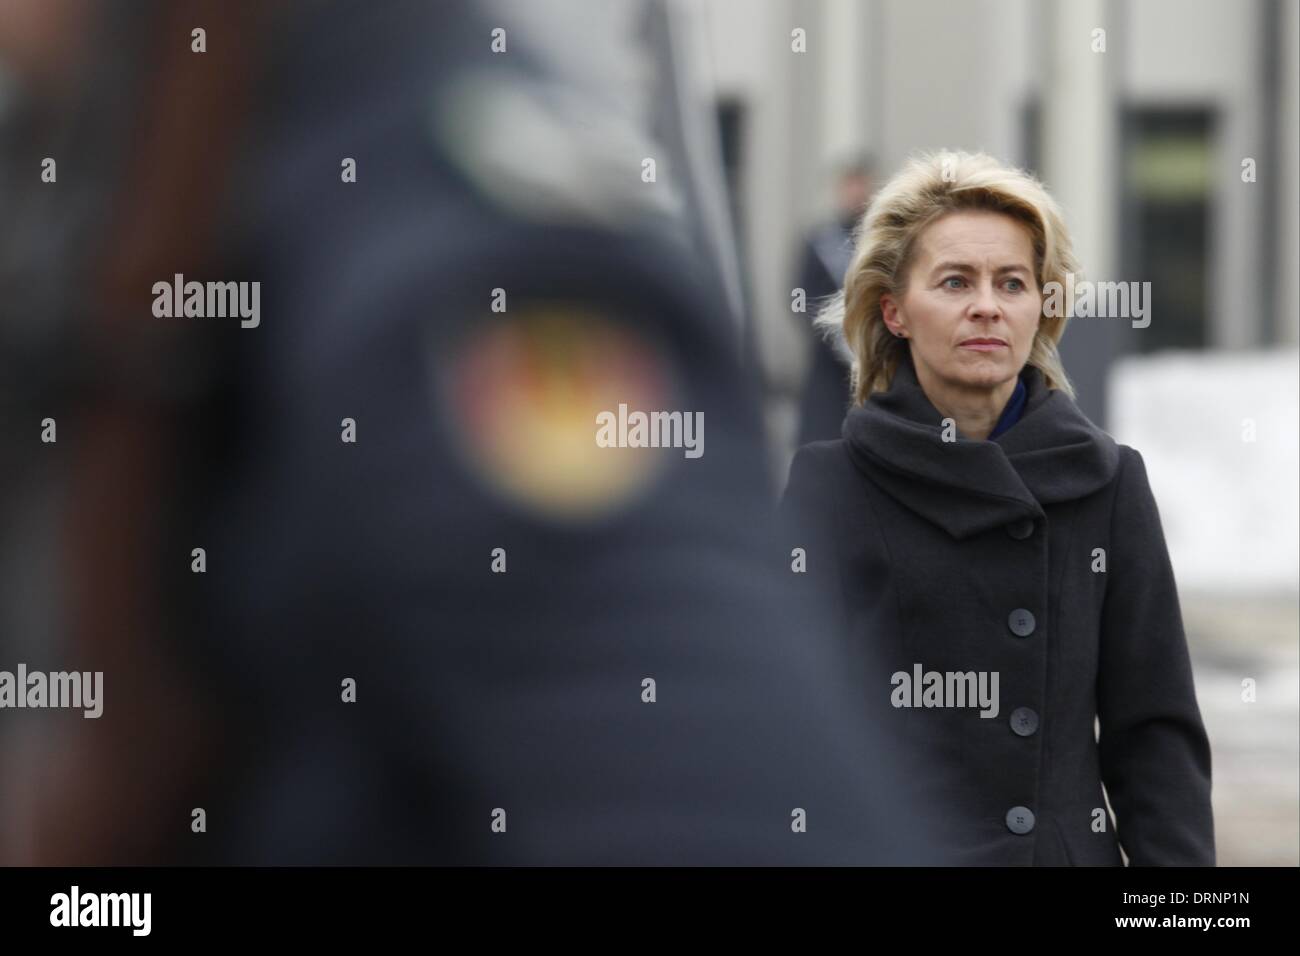 Berlin, Germany. 30th Jan, 2014. Ursula von der Leyen (CDU), Minister of Defence, receives the Israeli Secretary of Defense, Mosche ''Bogie'' Jaalon, with with military honors and give a joint press Statements, in Berlin, Germany, on January 30, 2014. / Pictures: Ursula von der Leyen (CDU), Minister of Defence. © Reynaldo Paganelli/NurPhoto/ZUMAPRESS.com/Alamy Live News Stock Photo